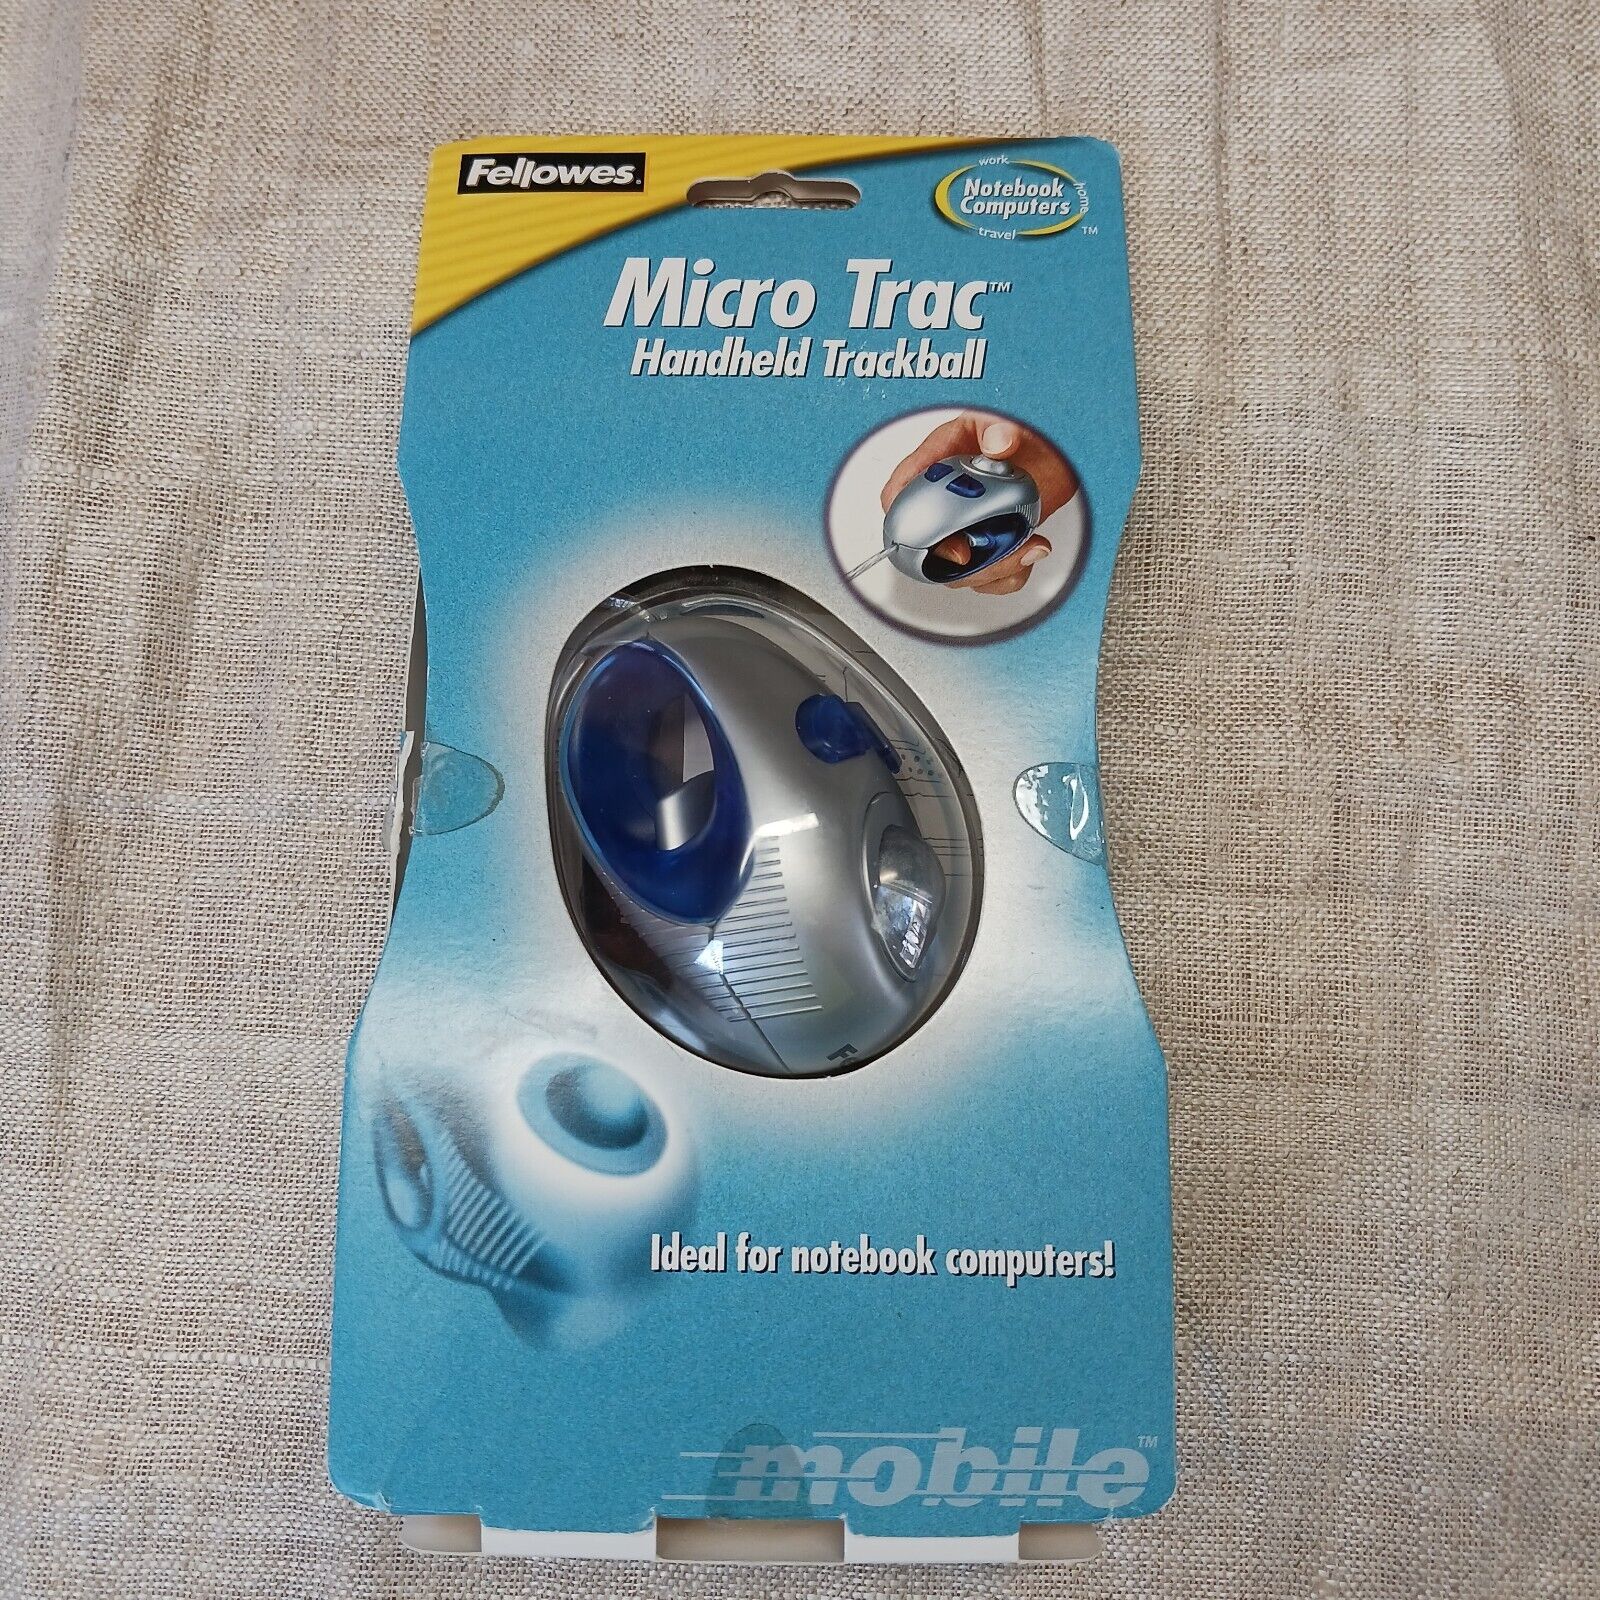 New Fellowes Micro Trac Handheld Trackball Laptop Mouse Wired 99928